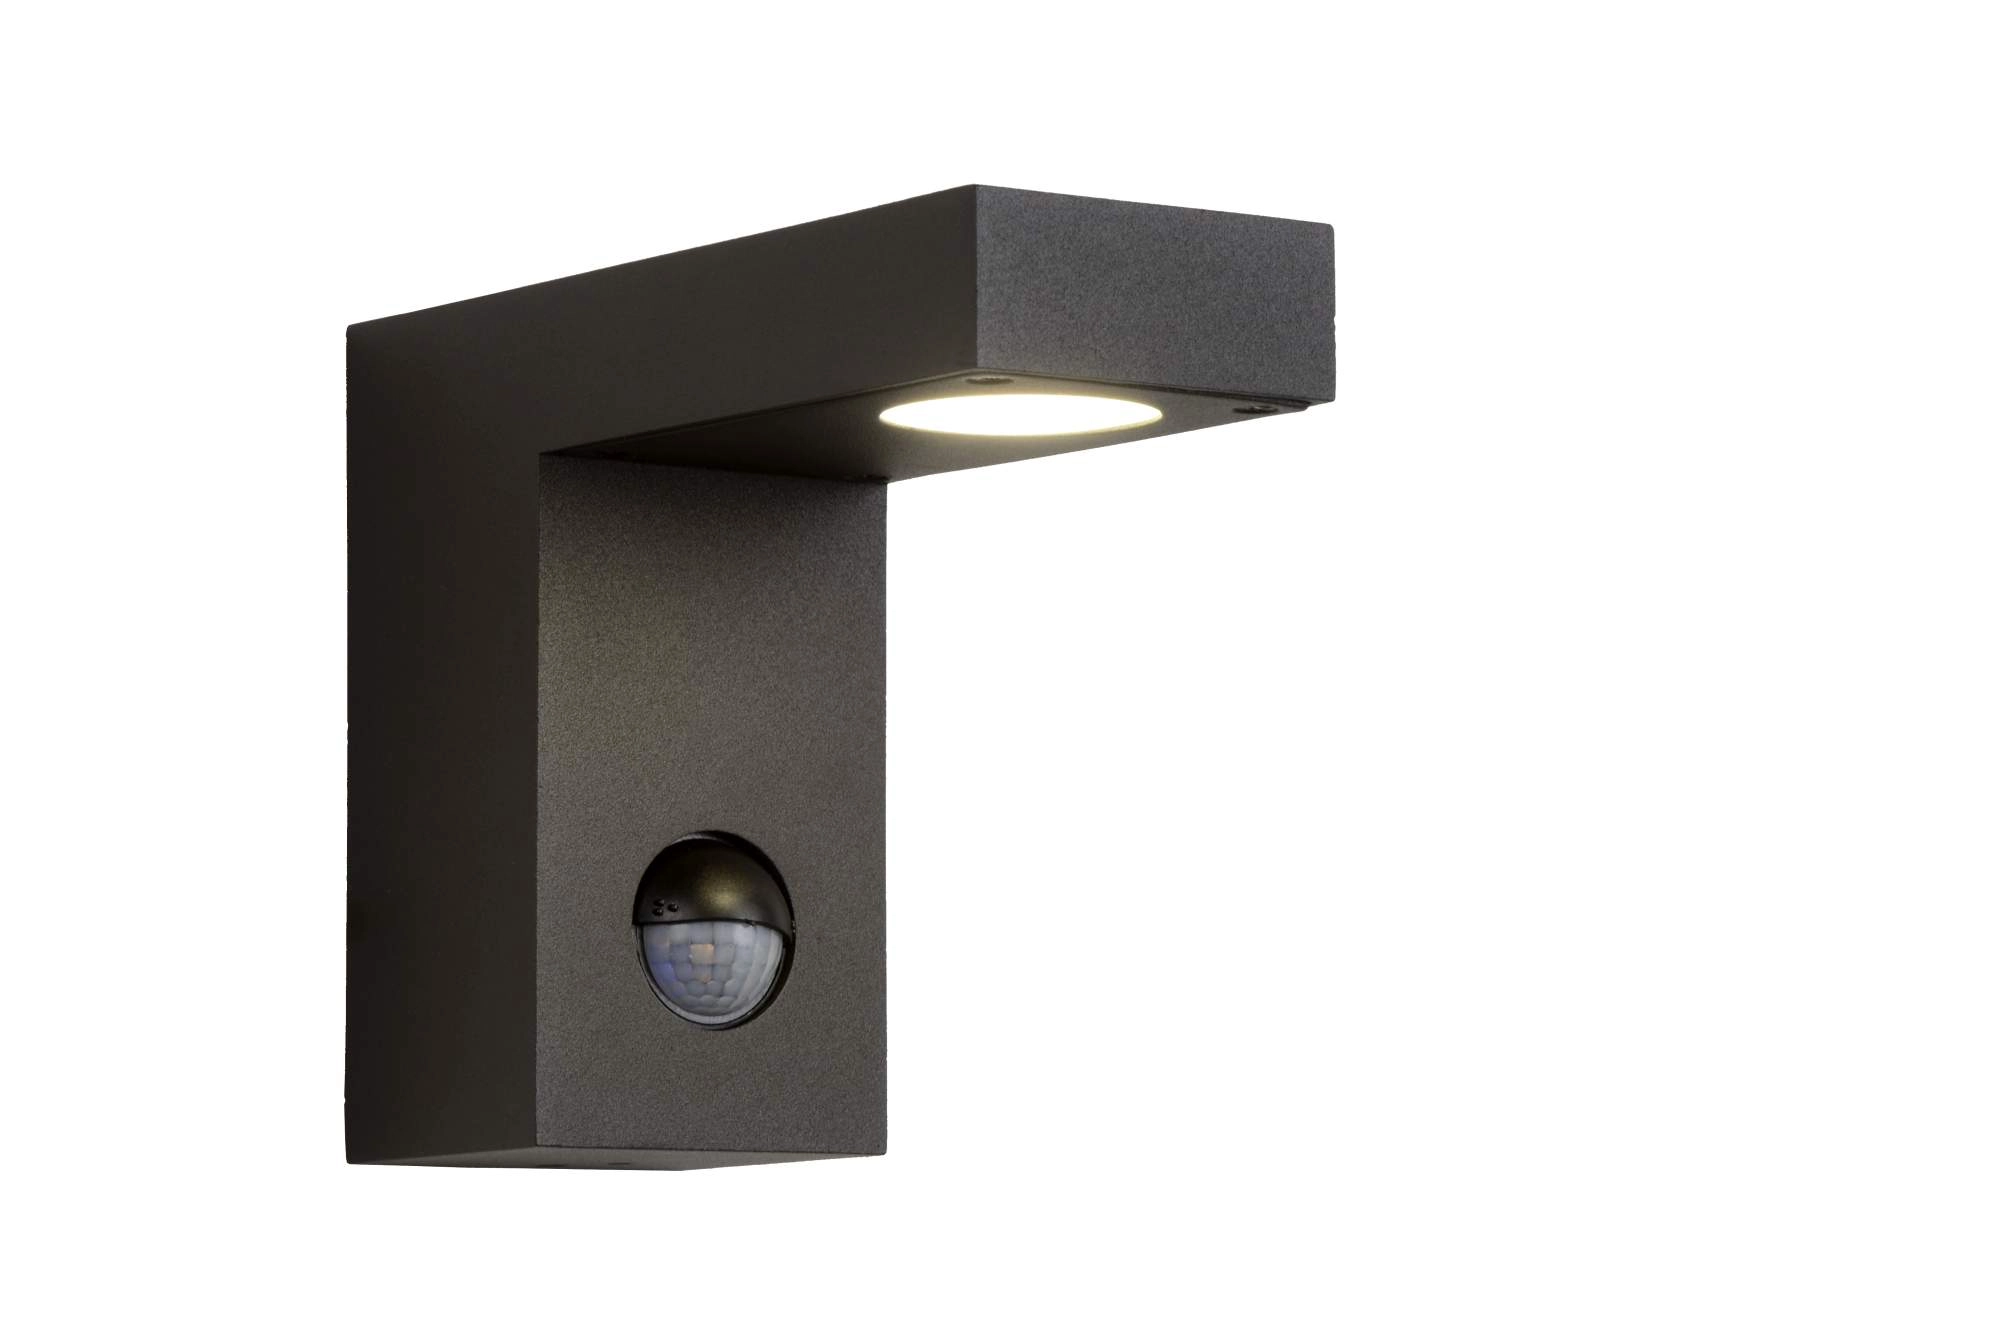 LU 28850/24/30 Lucide TEXAS-IR - Wall spotlight Outdoor - LED - 1x7W 3000K - IP54 - Anthracite